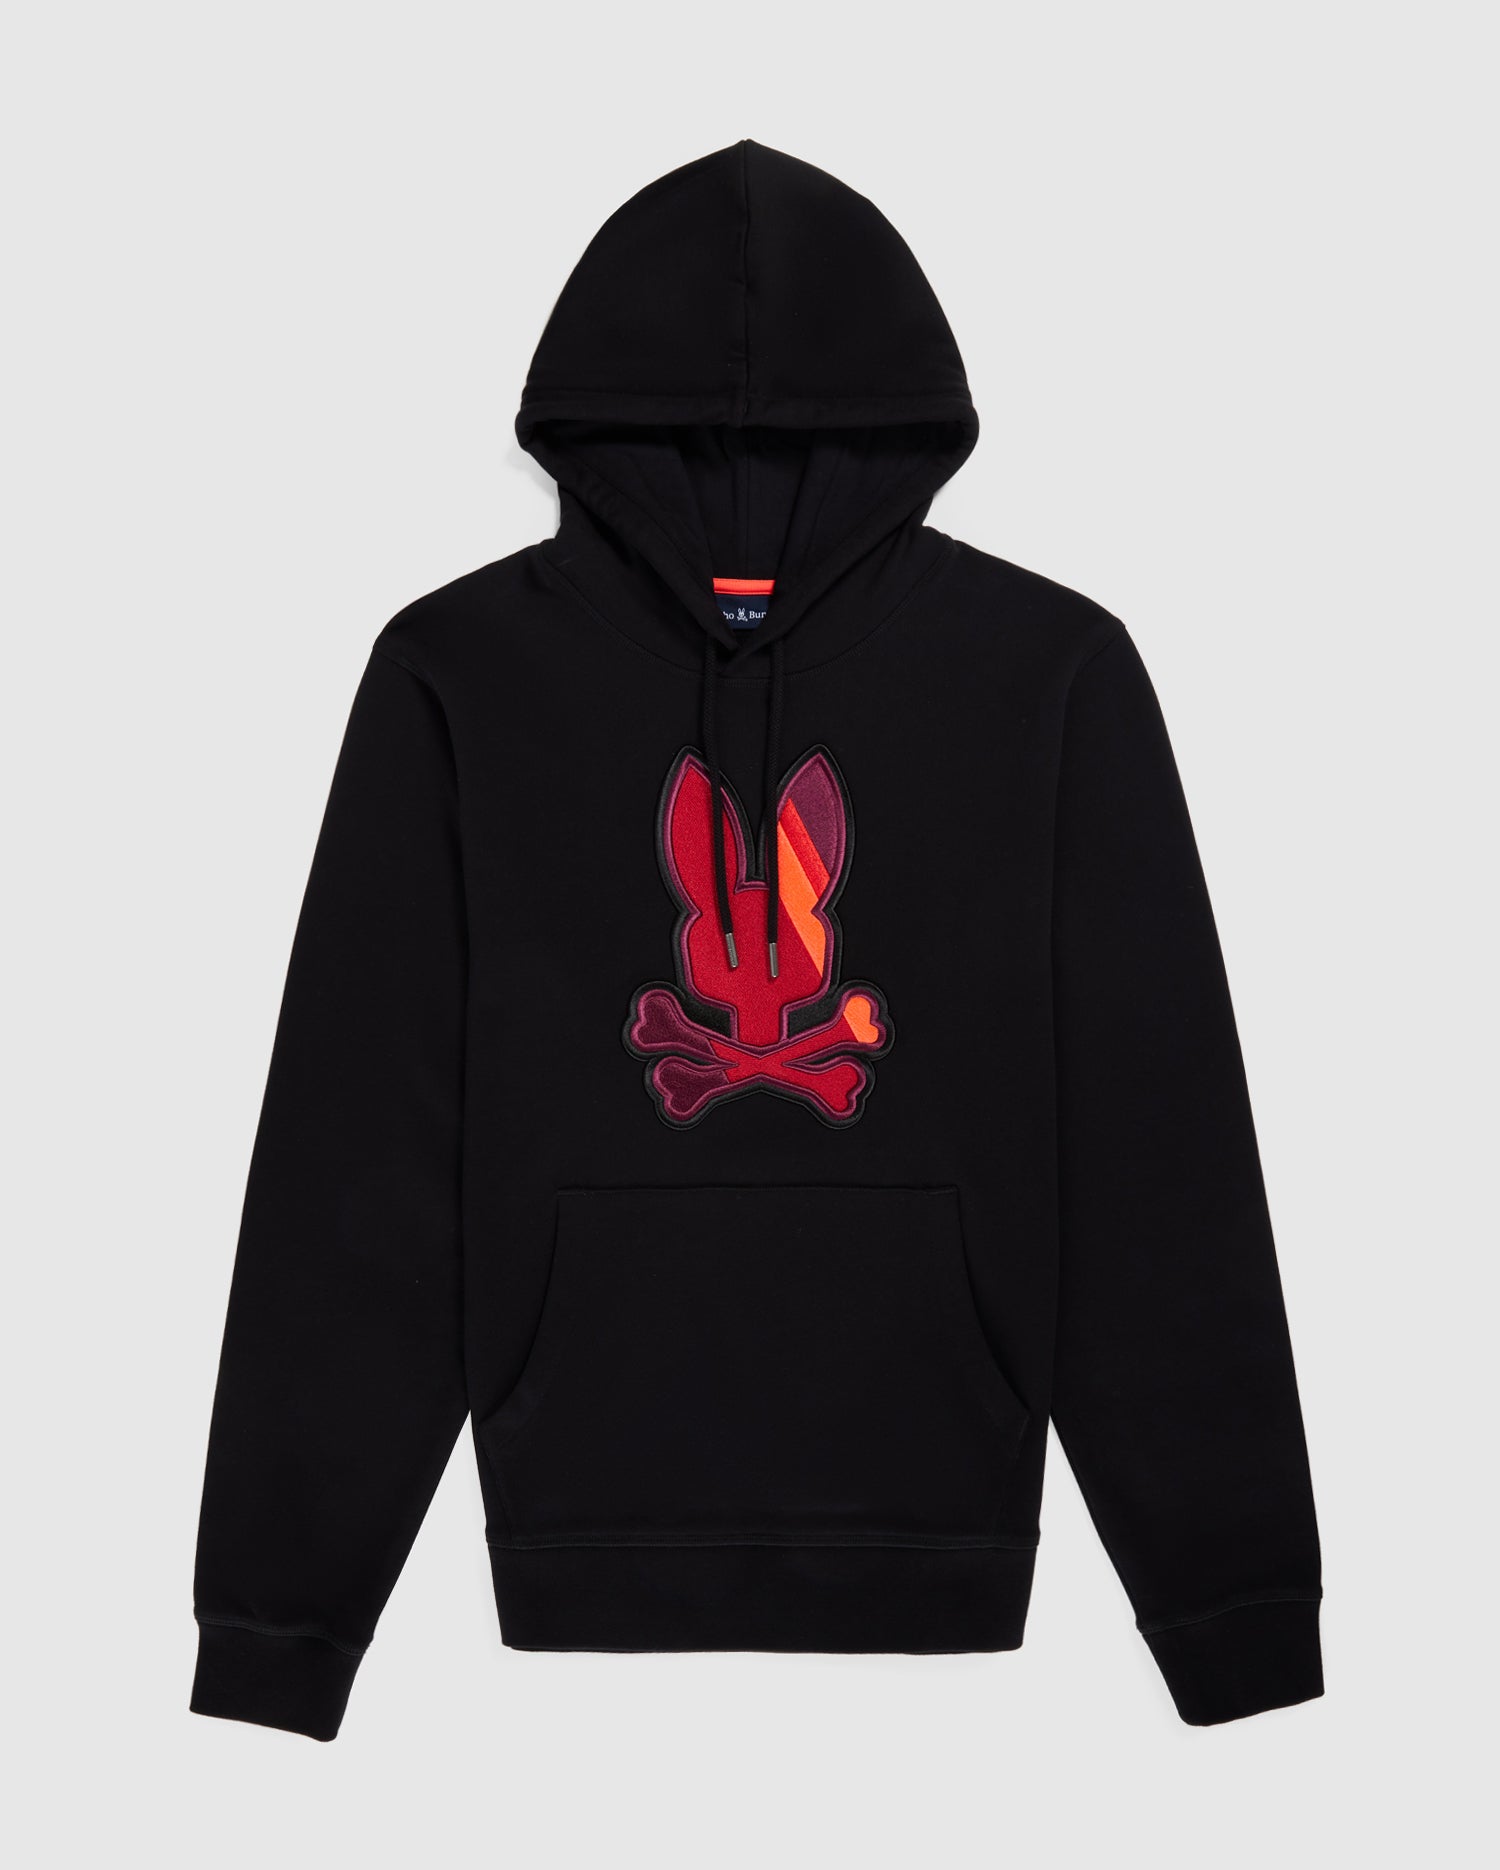 Take a tour with @David, Men's Fashion of our latest Psycho Bunny sto, Psycho Bunny